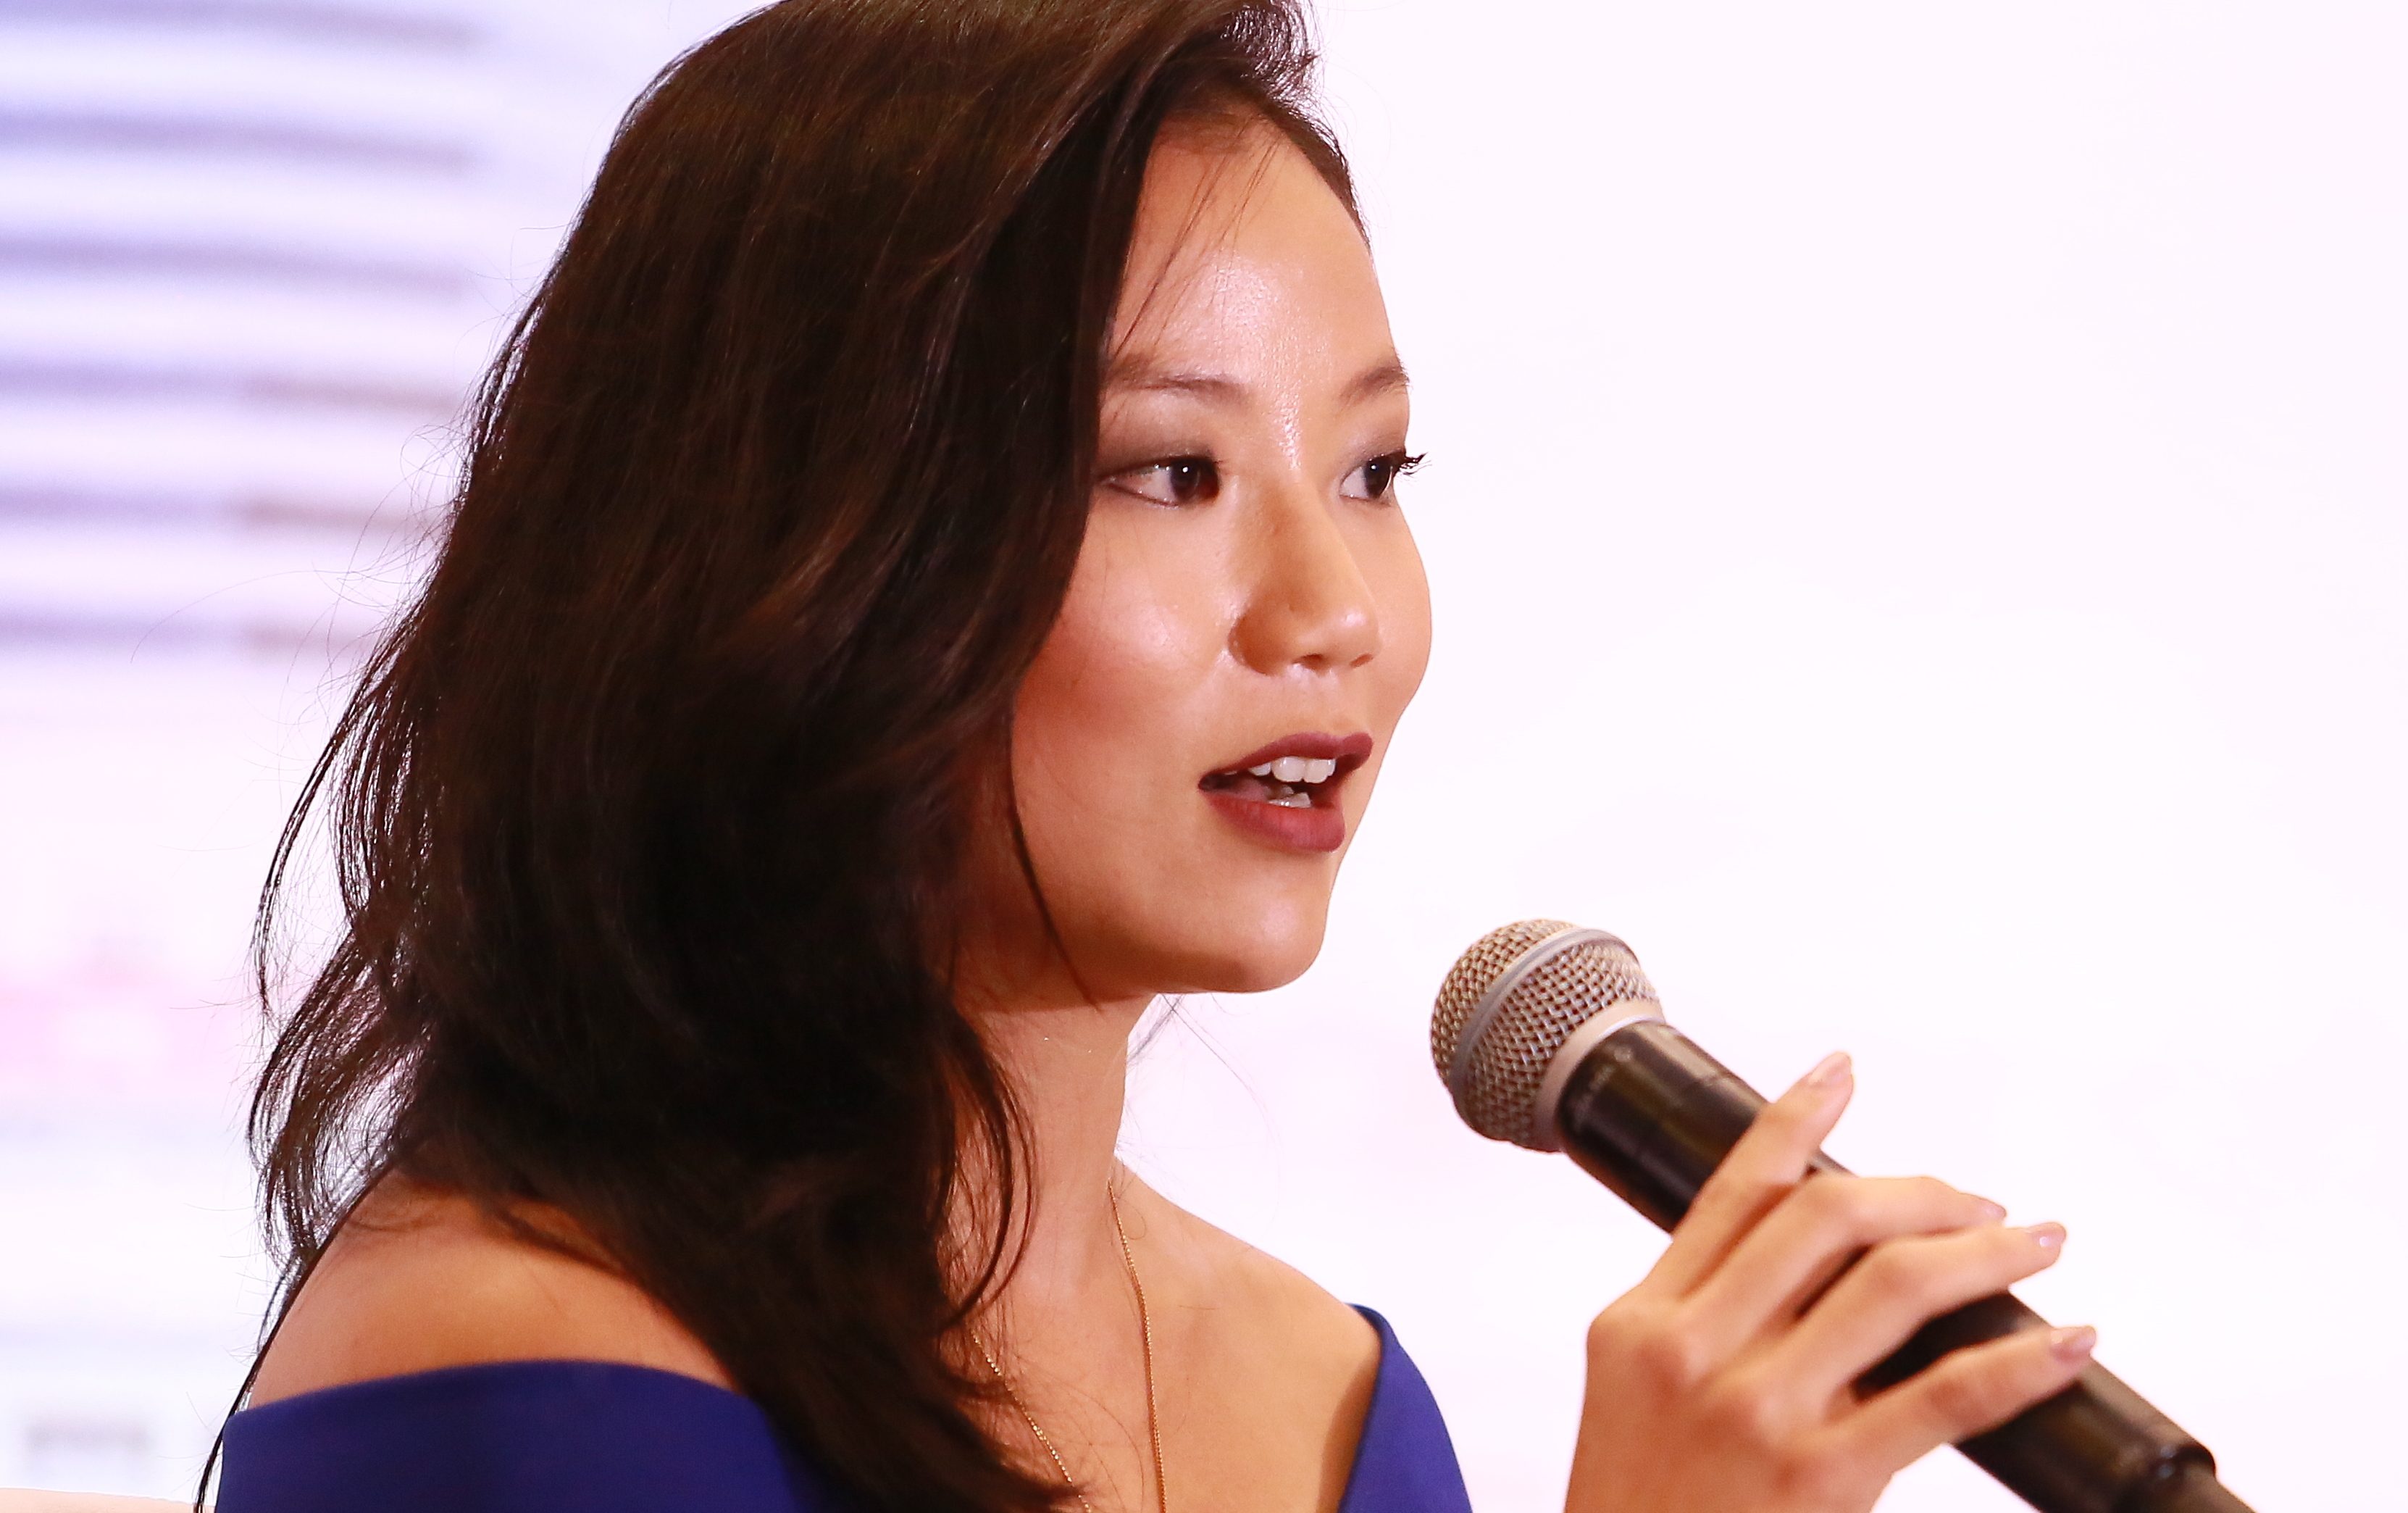 Gender funding gap not pipeline but a capital access problem, says TBDF's Sarah Chen